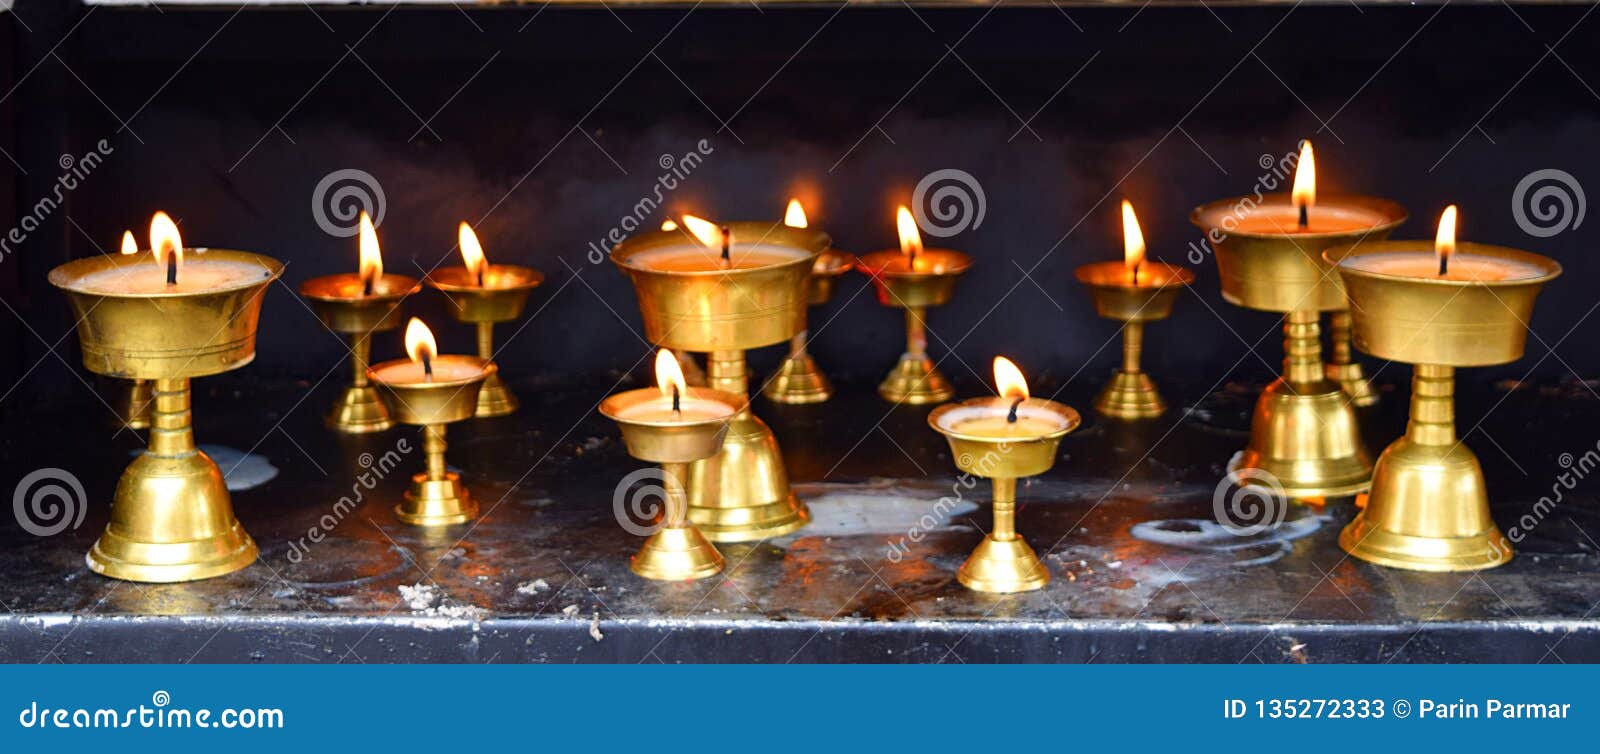 IV. How to Use Butter Lamps and Candles in Spiritual Practices